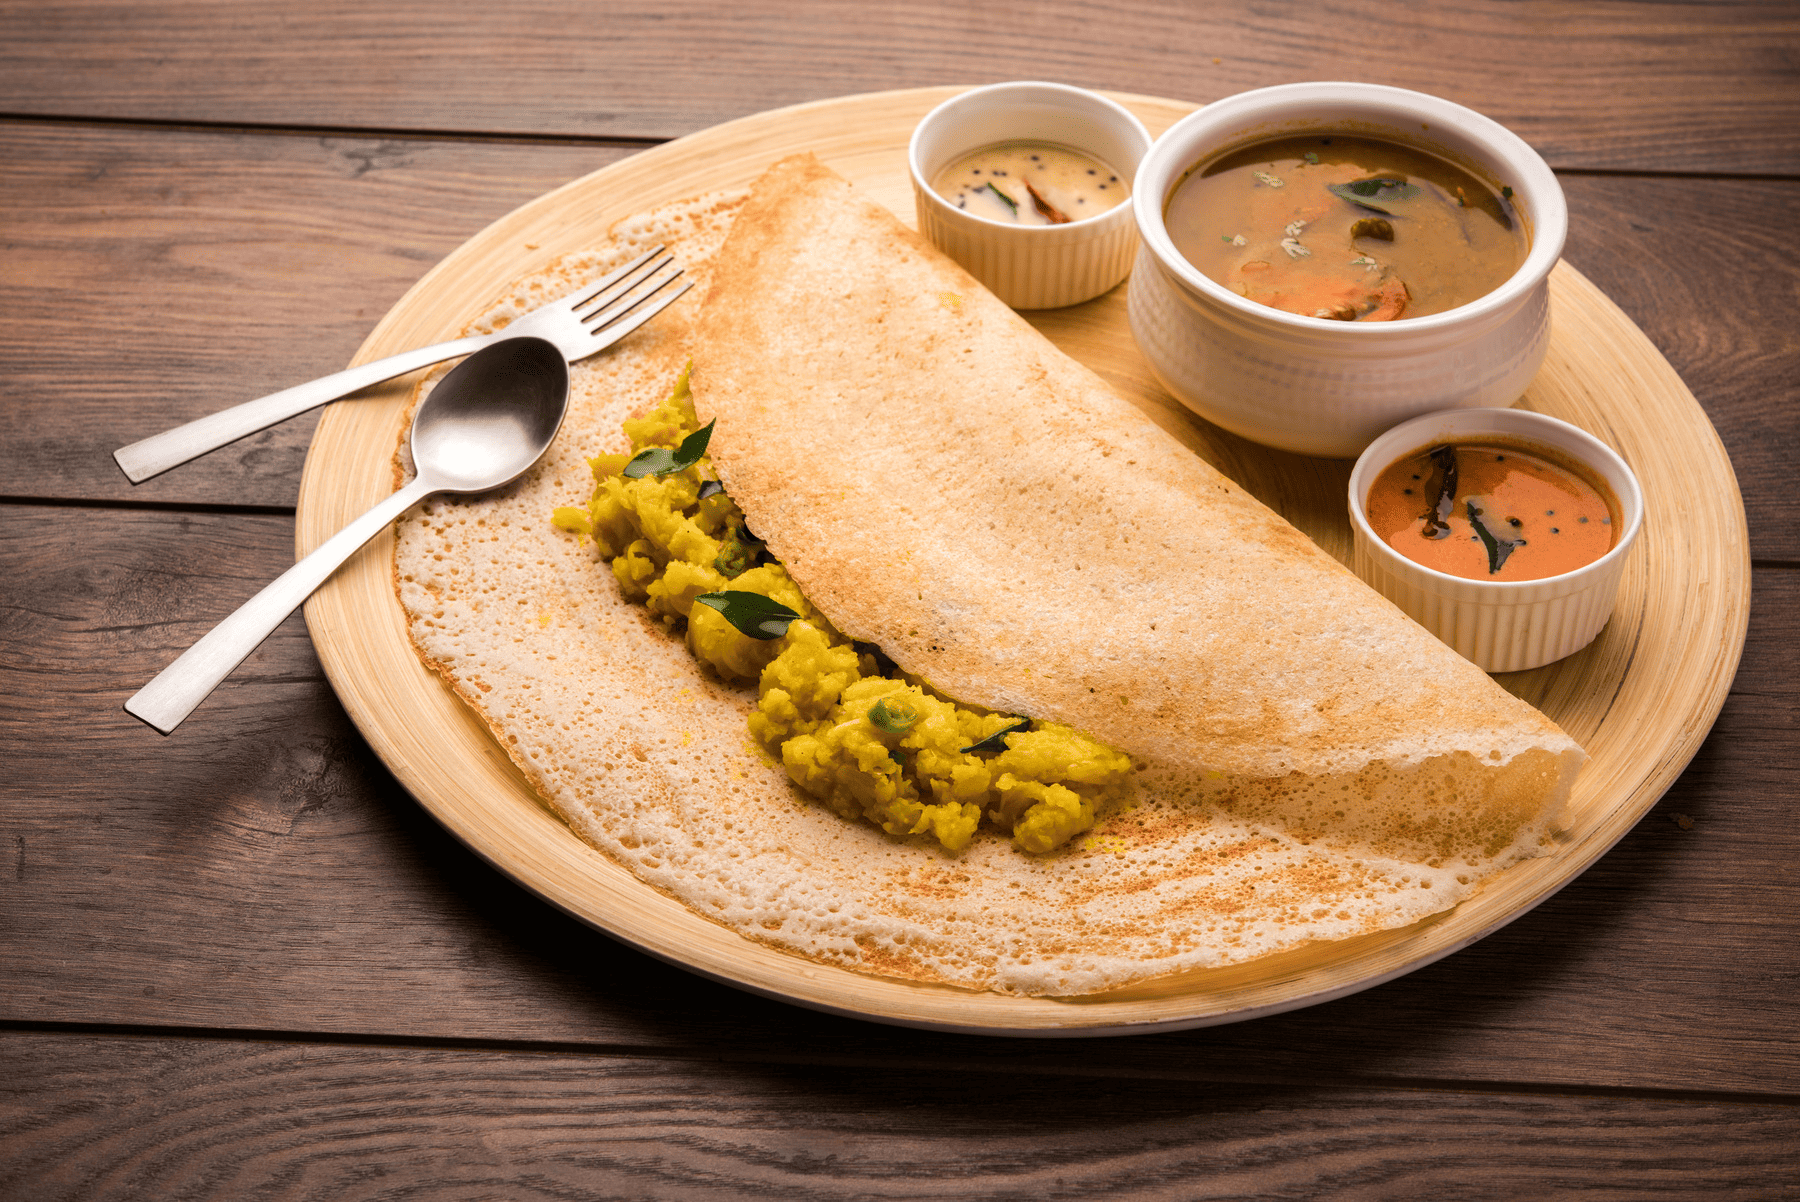 Dosa, a South Indian delicacy served with chutney and sambhar